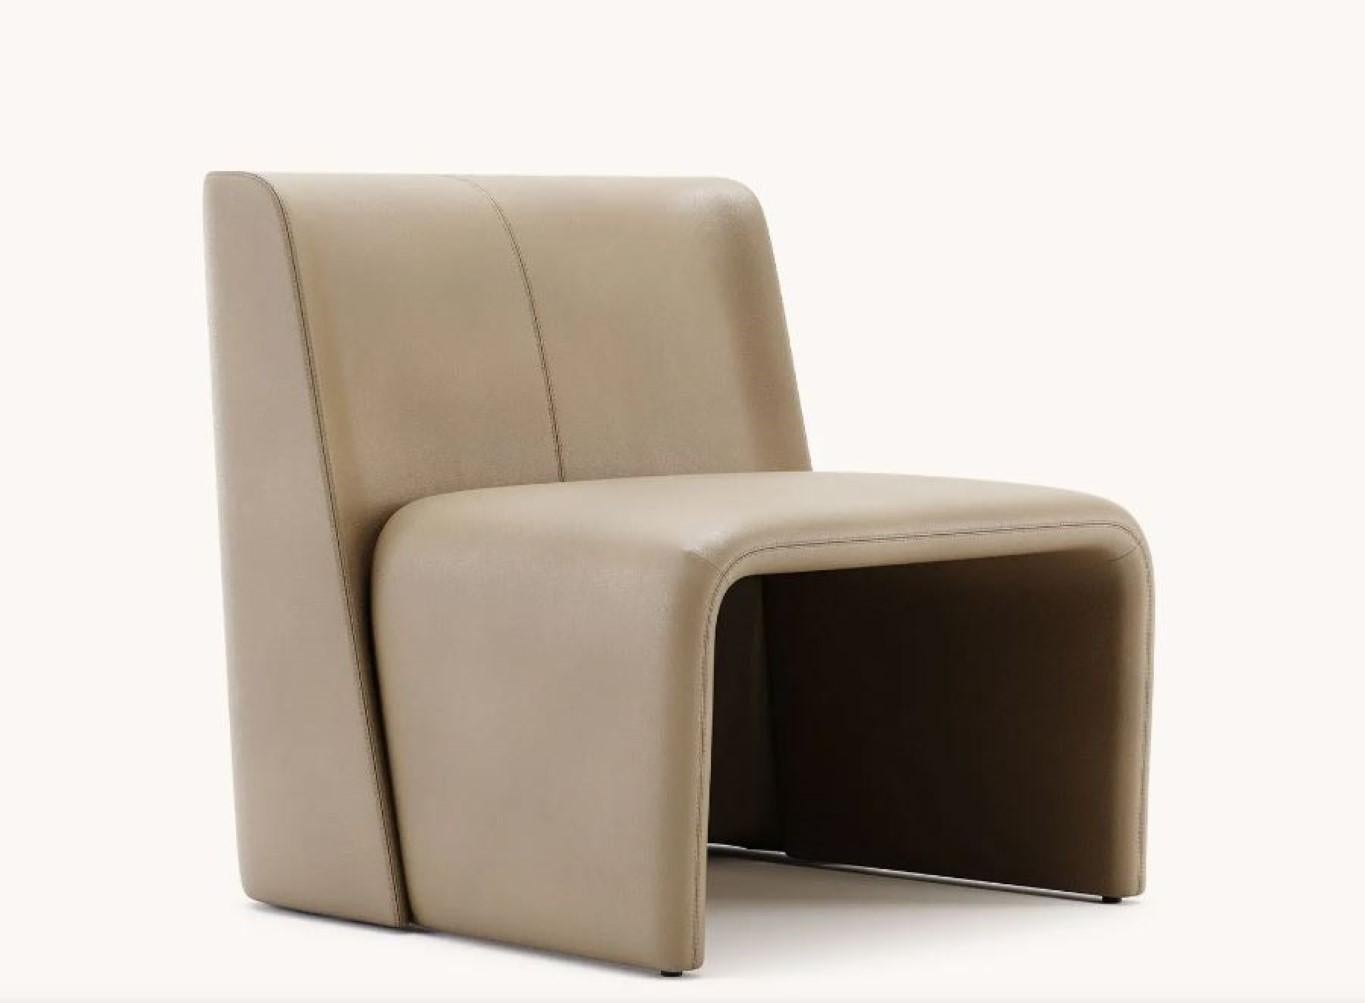 Legacy armchair by Domkapa
Materials: Natural Leather.
Dimensions: W 70 x D 79 x H 75 cm. 
Also available in different materials. 

This stunning armchair is the result of highly innovative solutions attached to functional and cozy shapes,